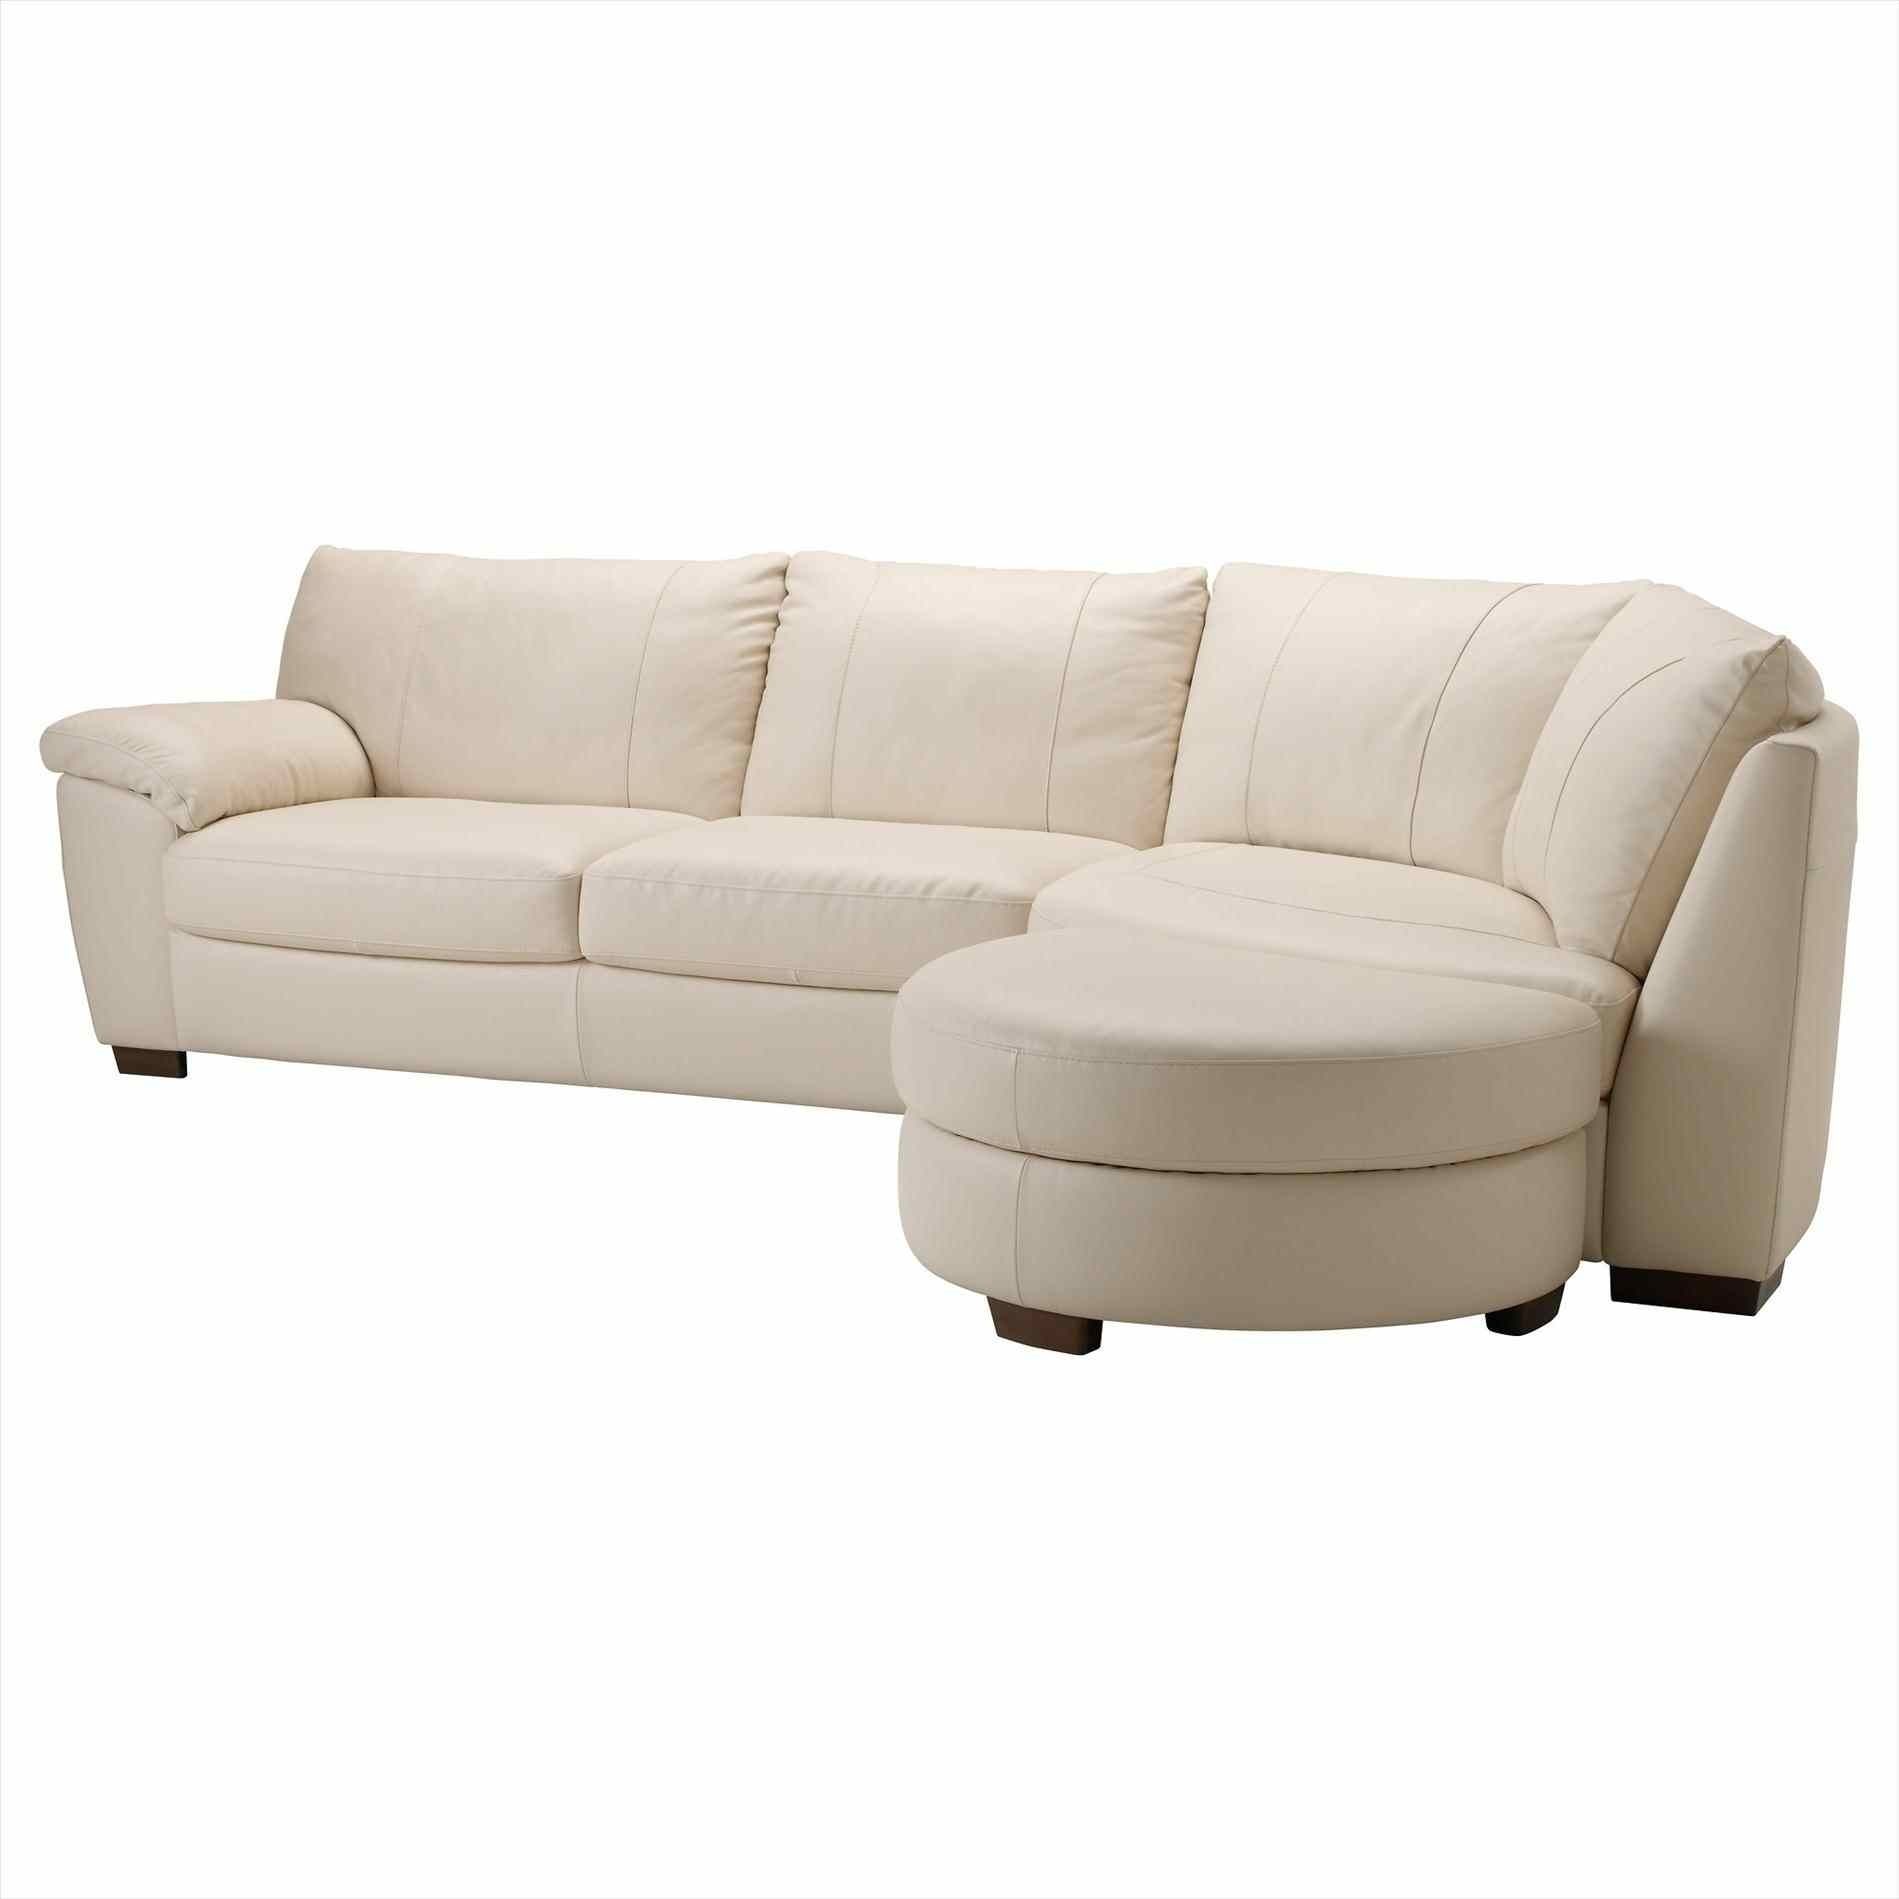 Couch : Cm Furniture Round Corner Couch Small Sofa Cm Fabric For Rounded Corner Sectional Sofas (View 9 of 10)